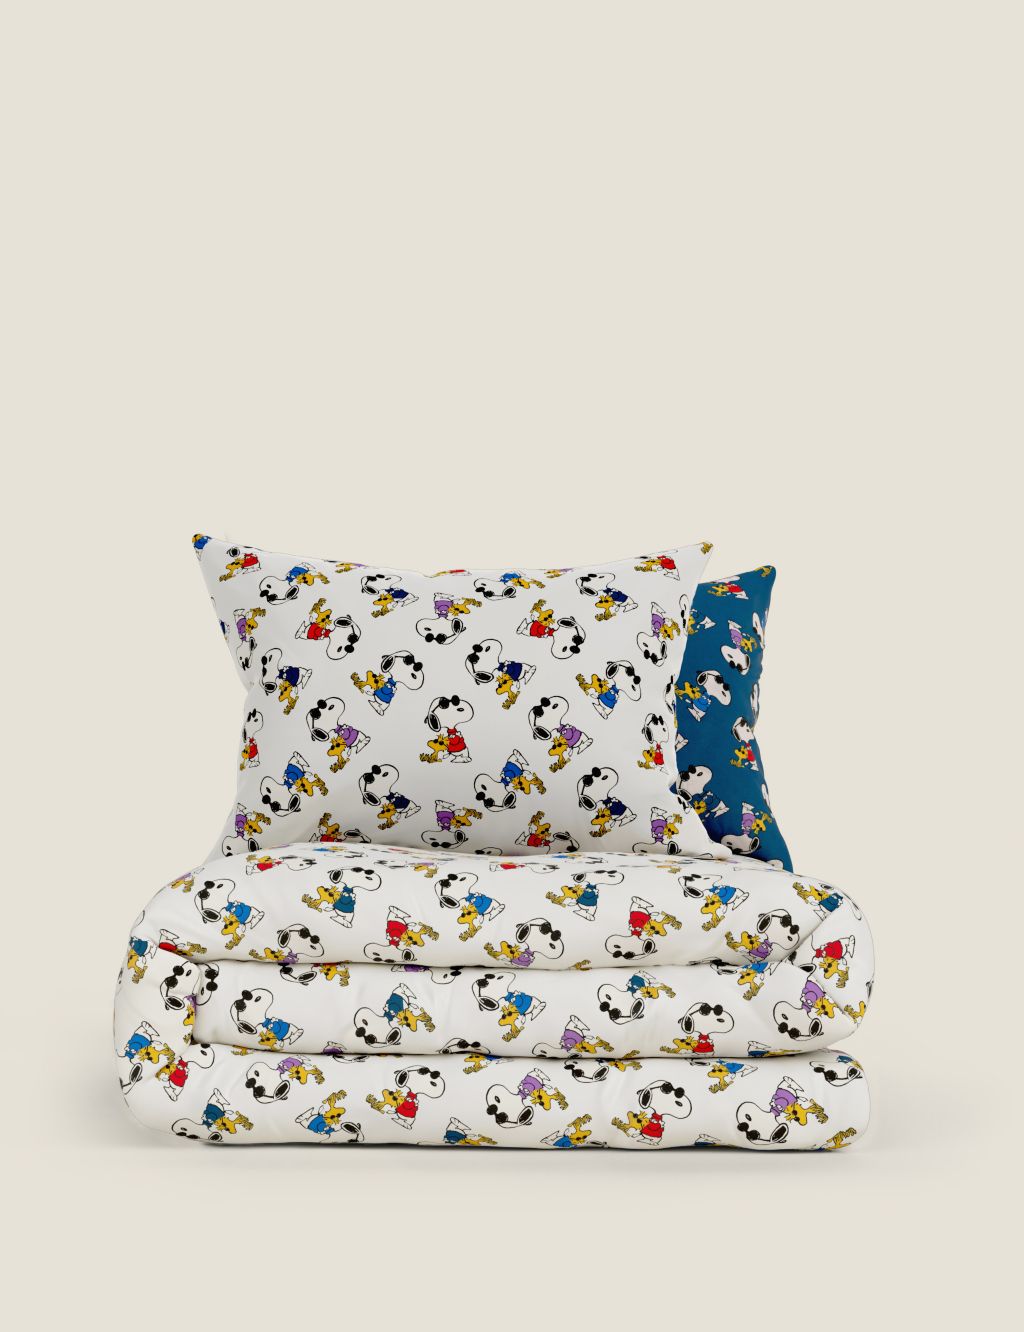 Snoopy™ & Woodstock Pure Cotton Bedding Set image 4